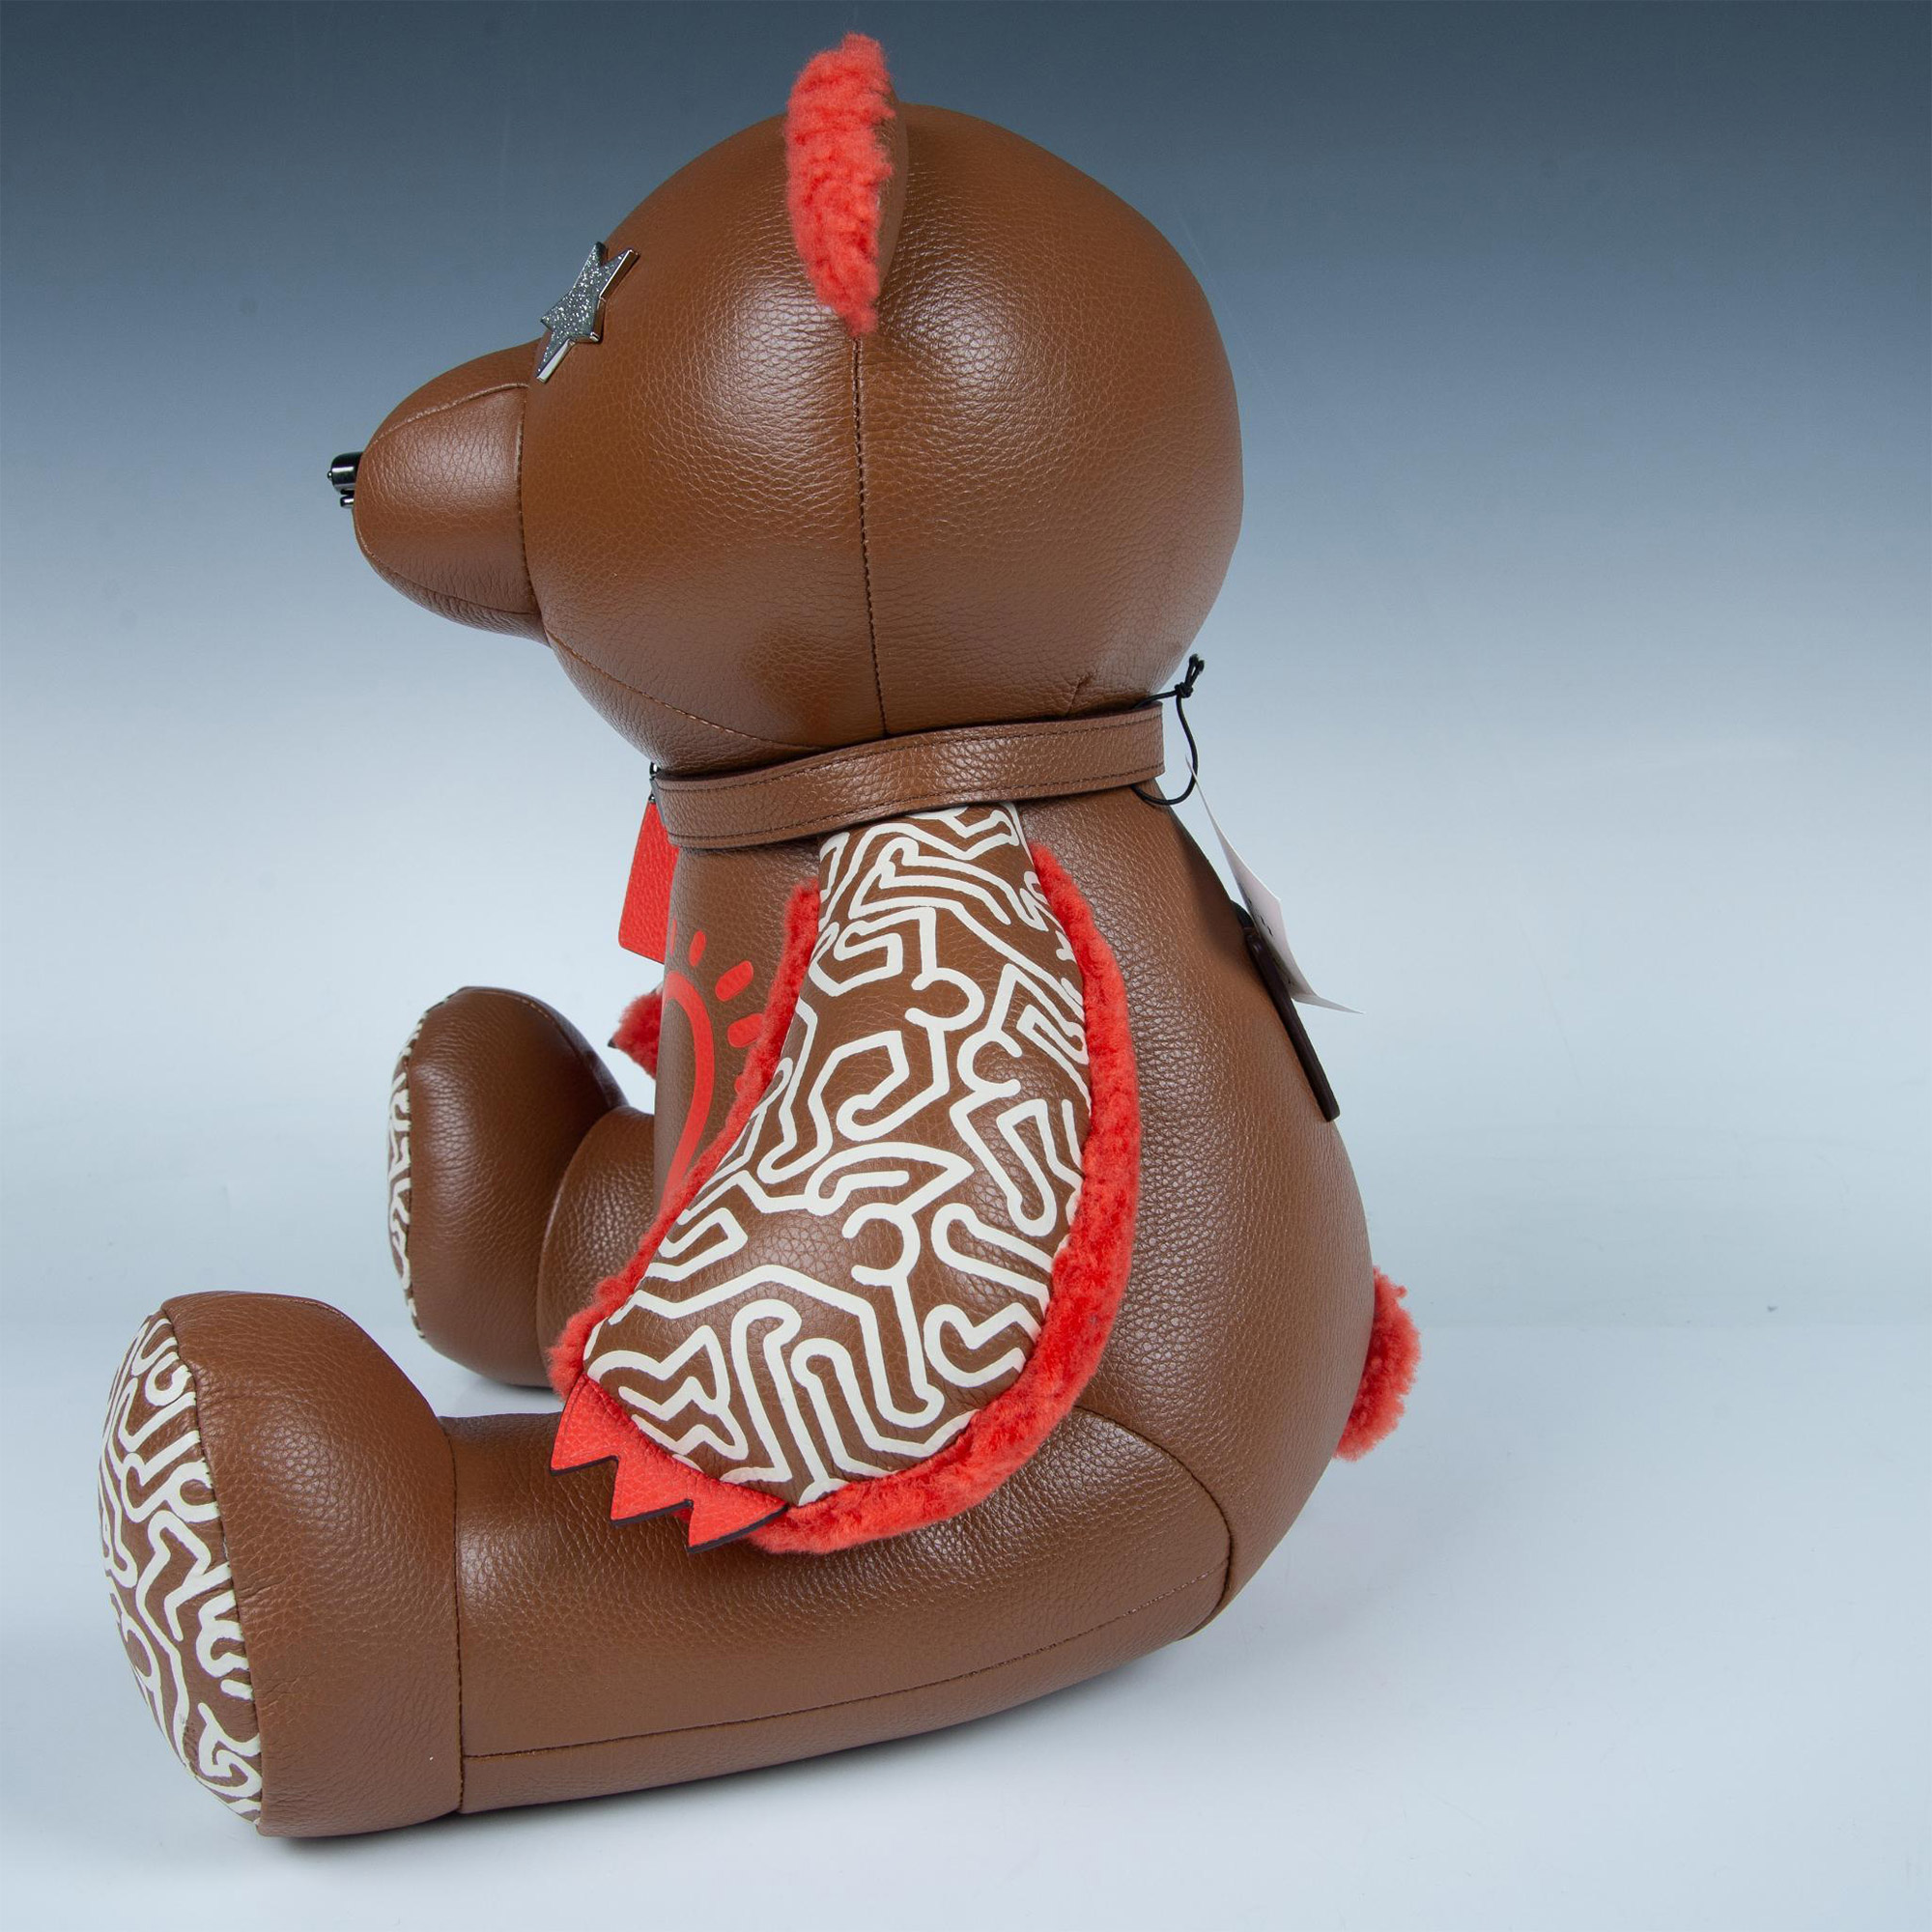 Coach Keith Haring Collaboration Plush Leather Teddy Bear - Image 9 of 9